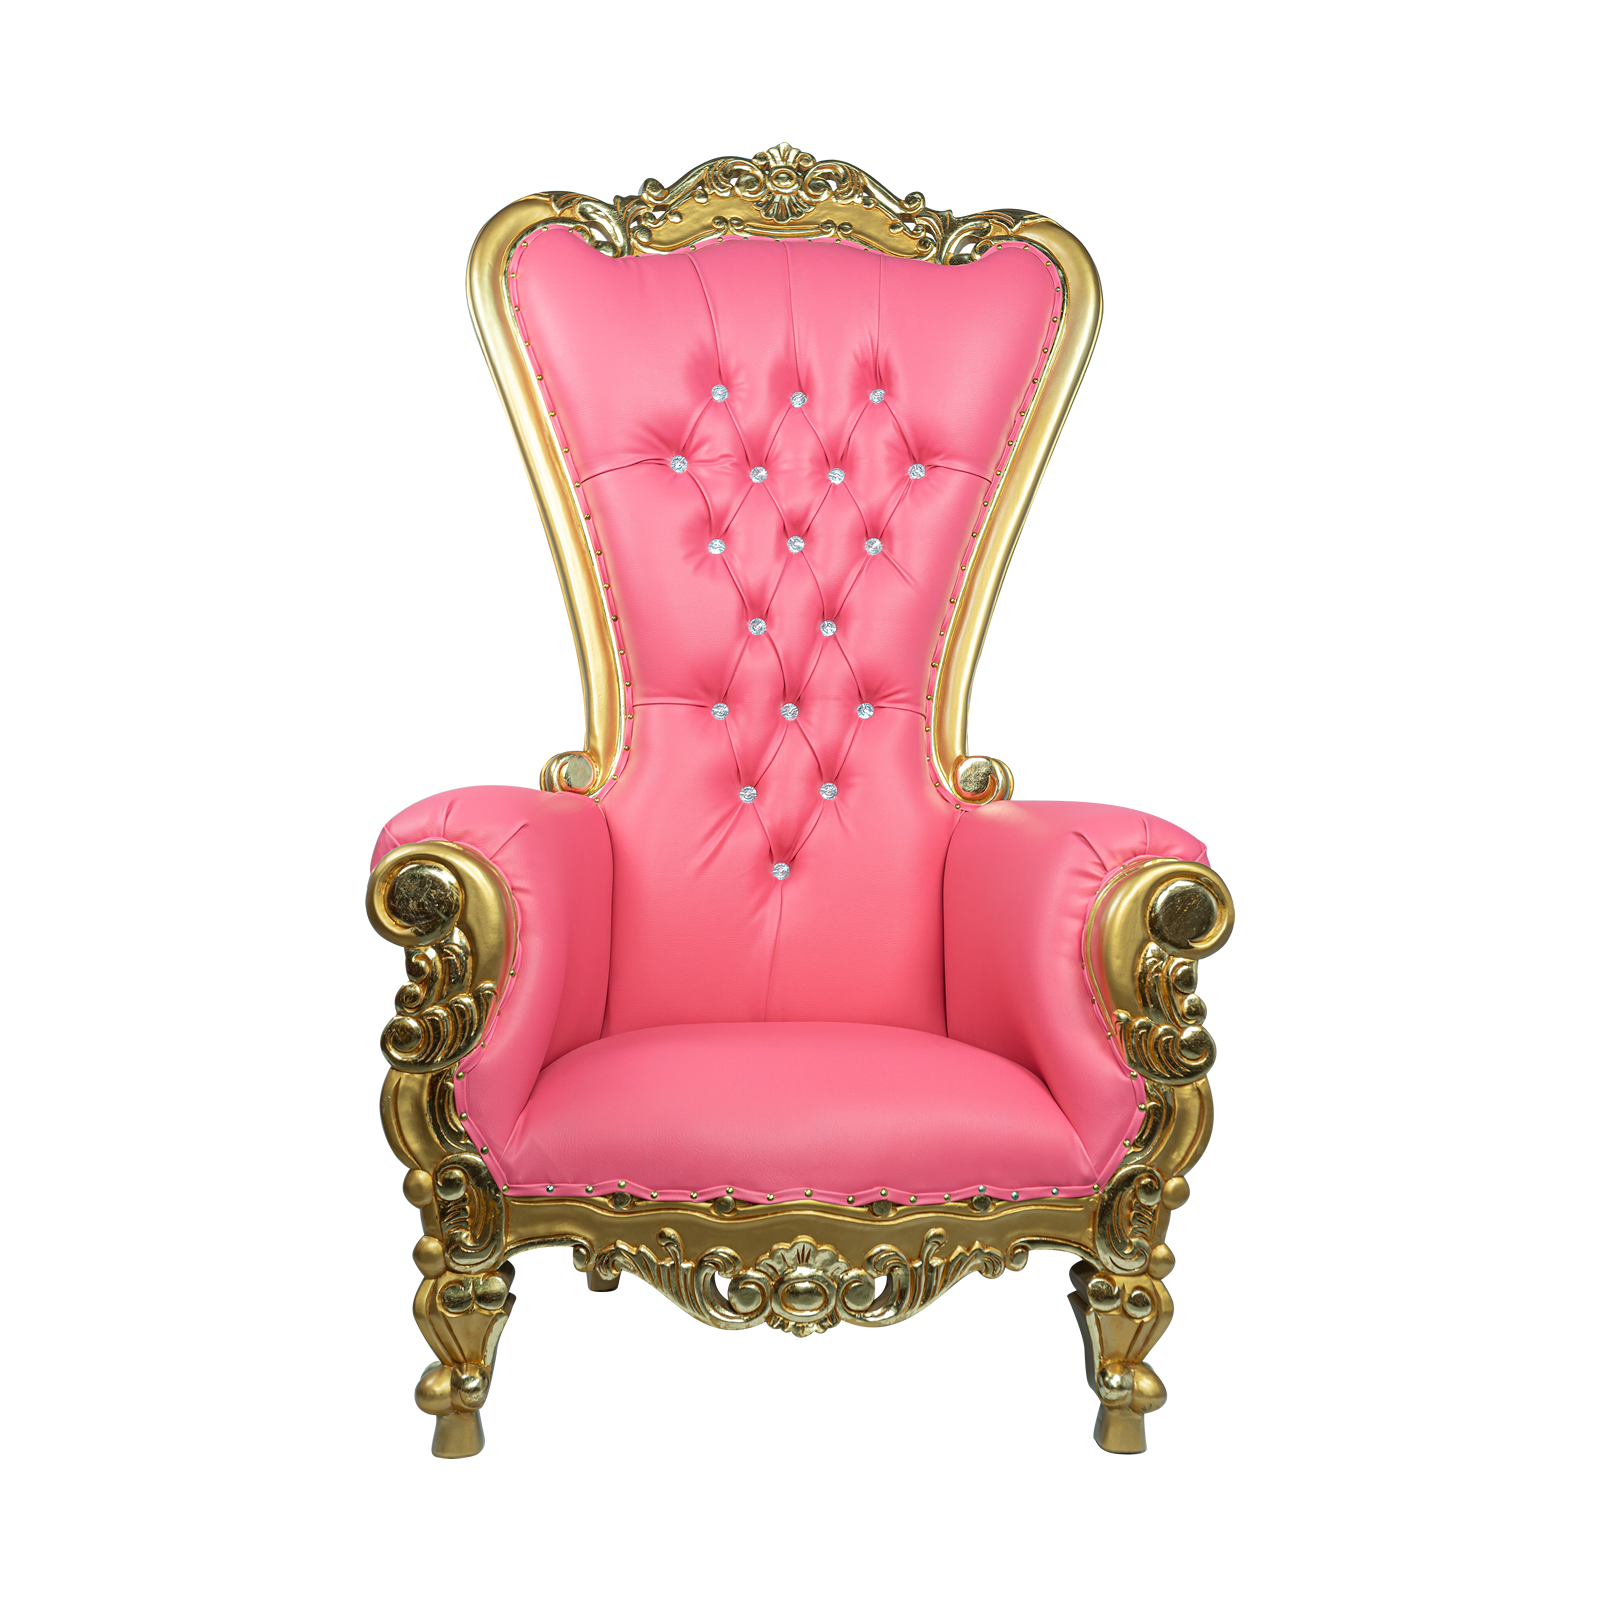 Shell Back Gold And Pink Throne Chair For Rent Houston Texas